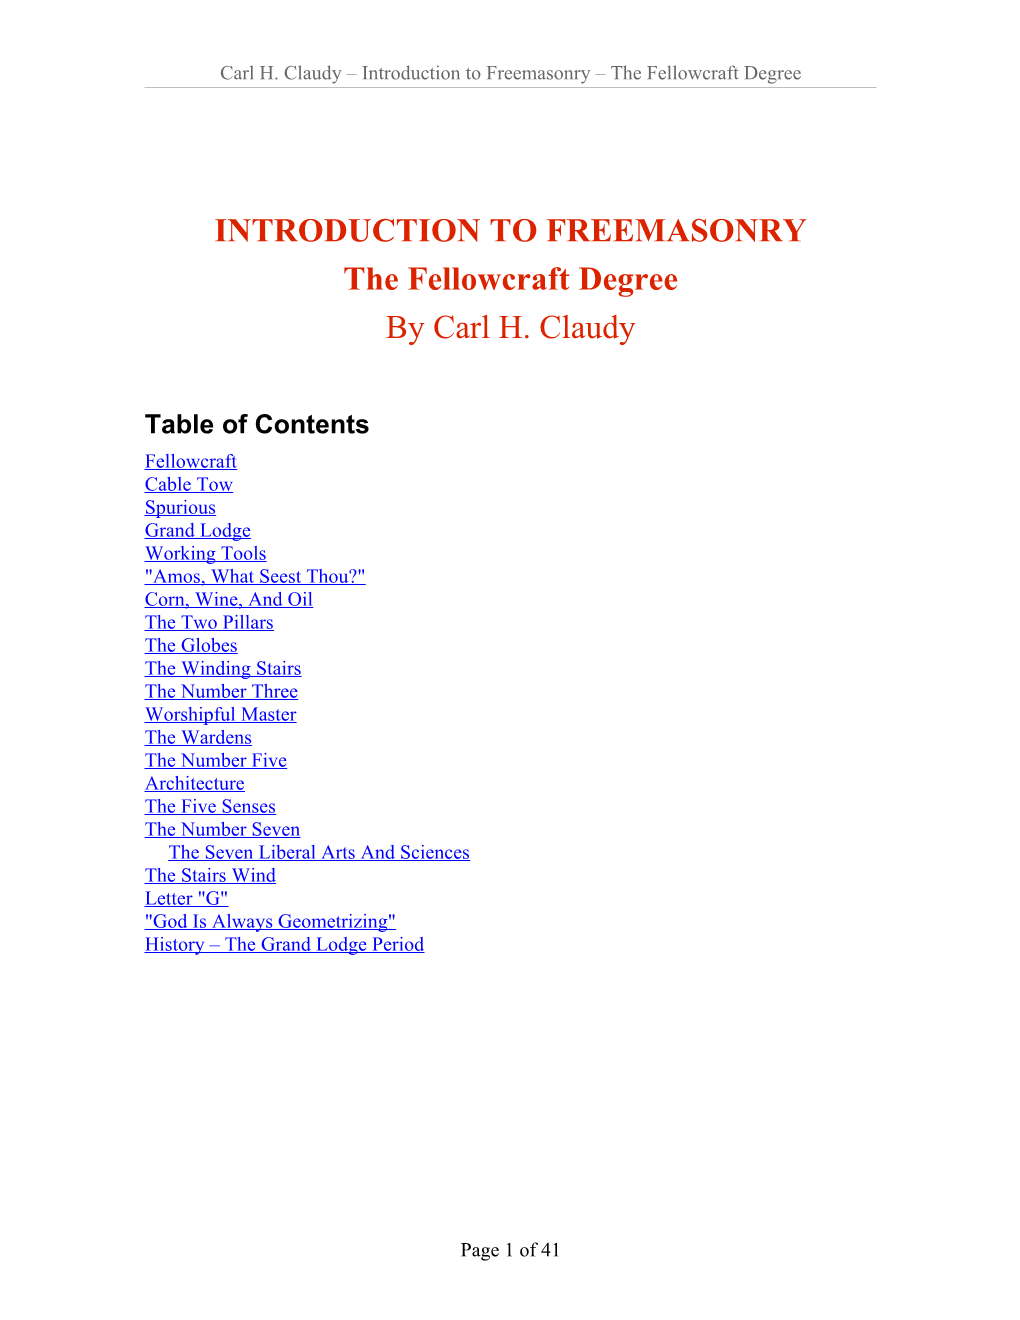 INTRODUCTION to FREEMASONRY the Fellowcraft Degree by Carl H